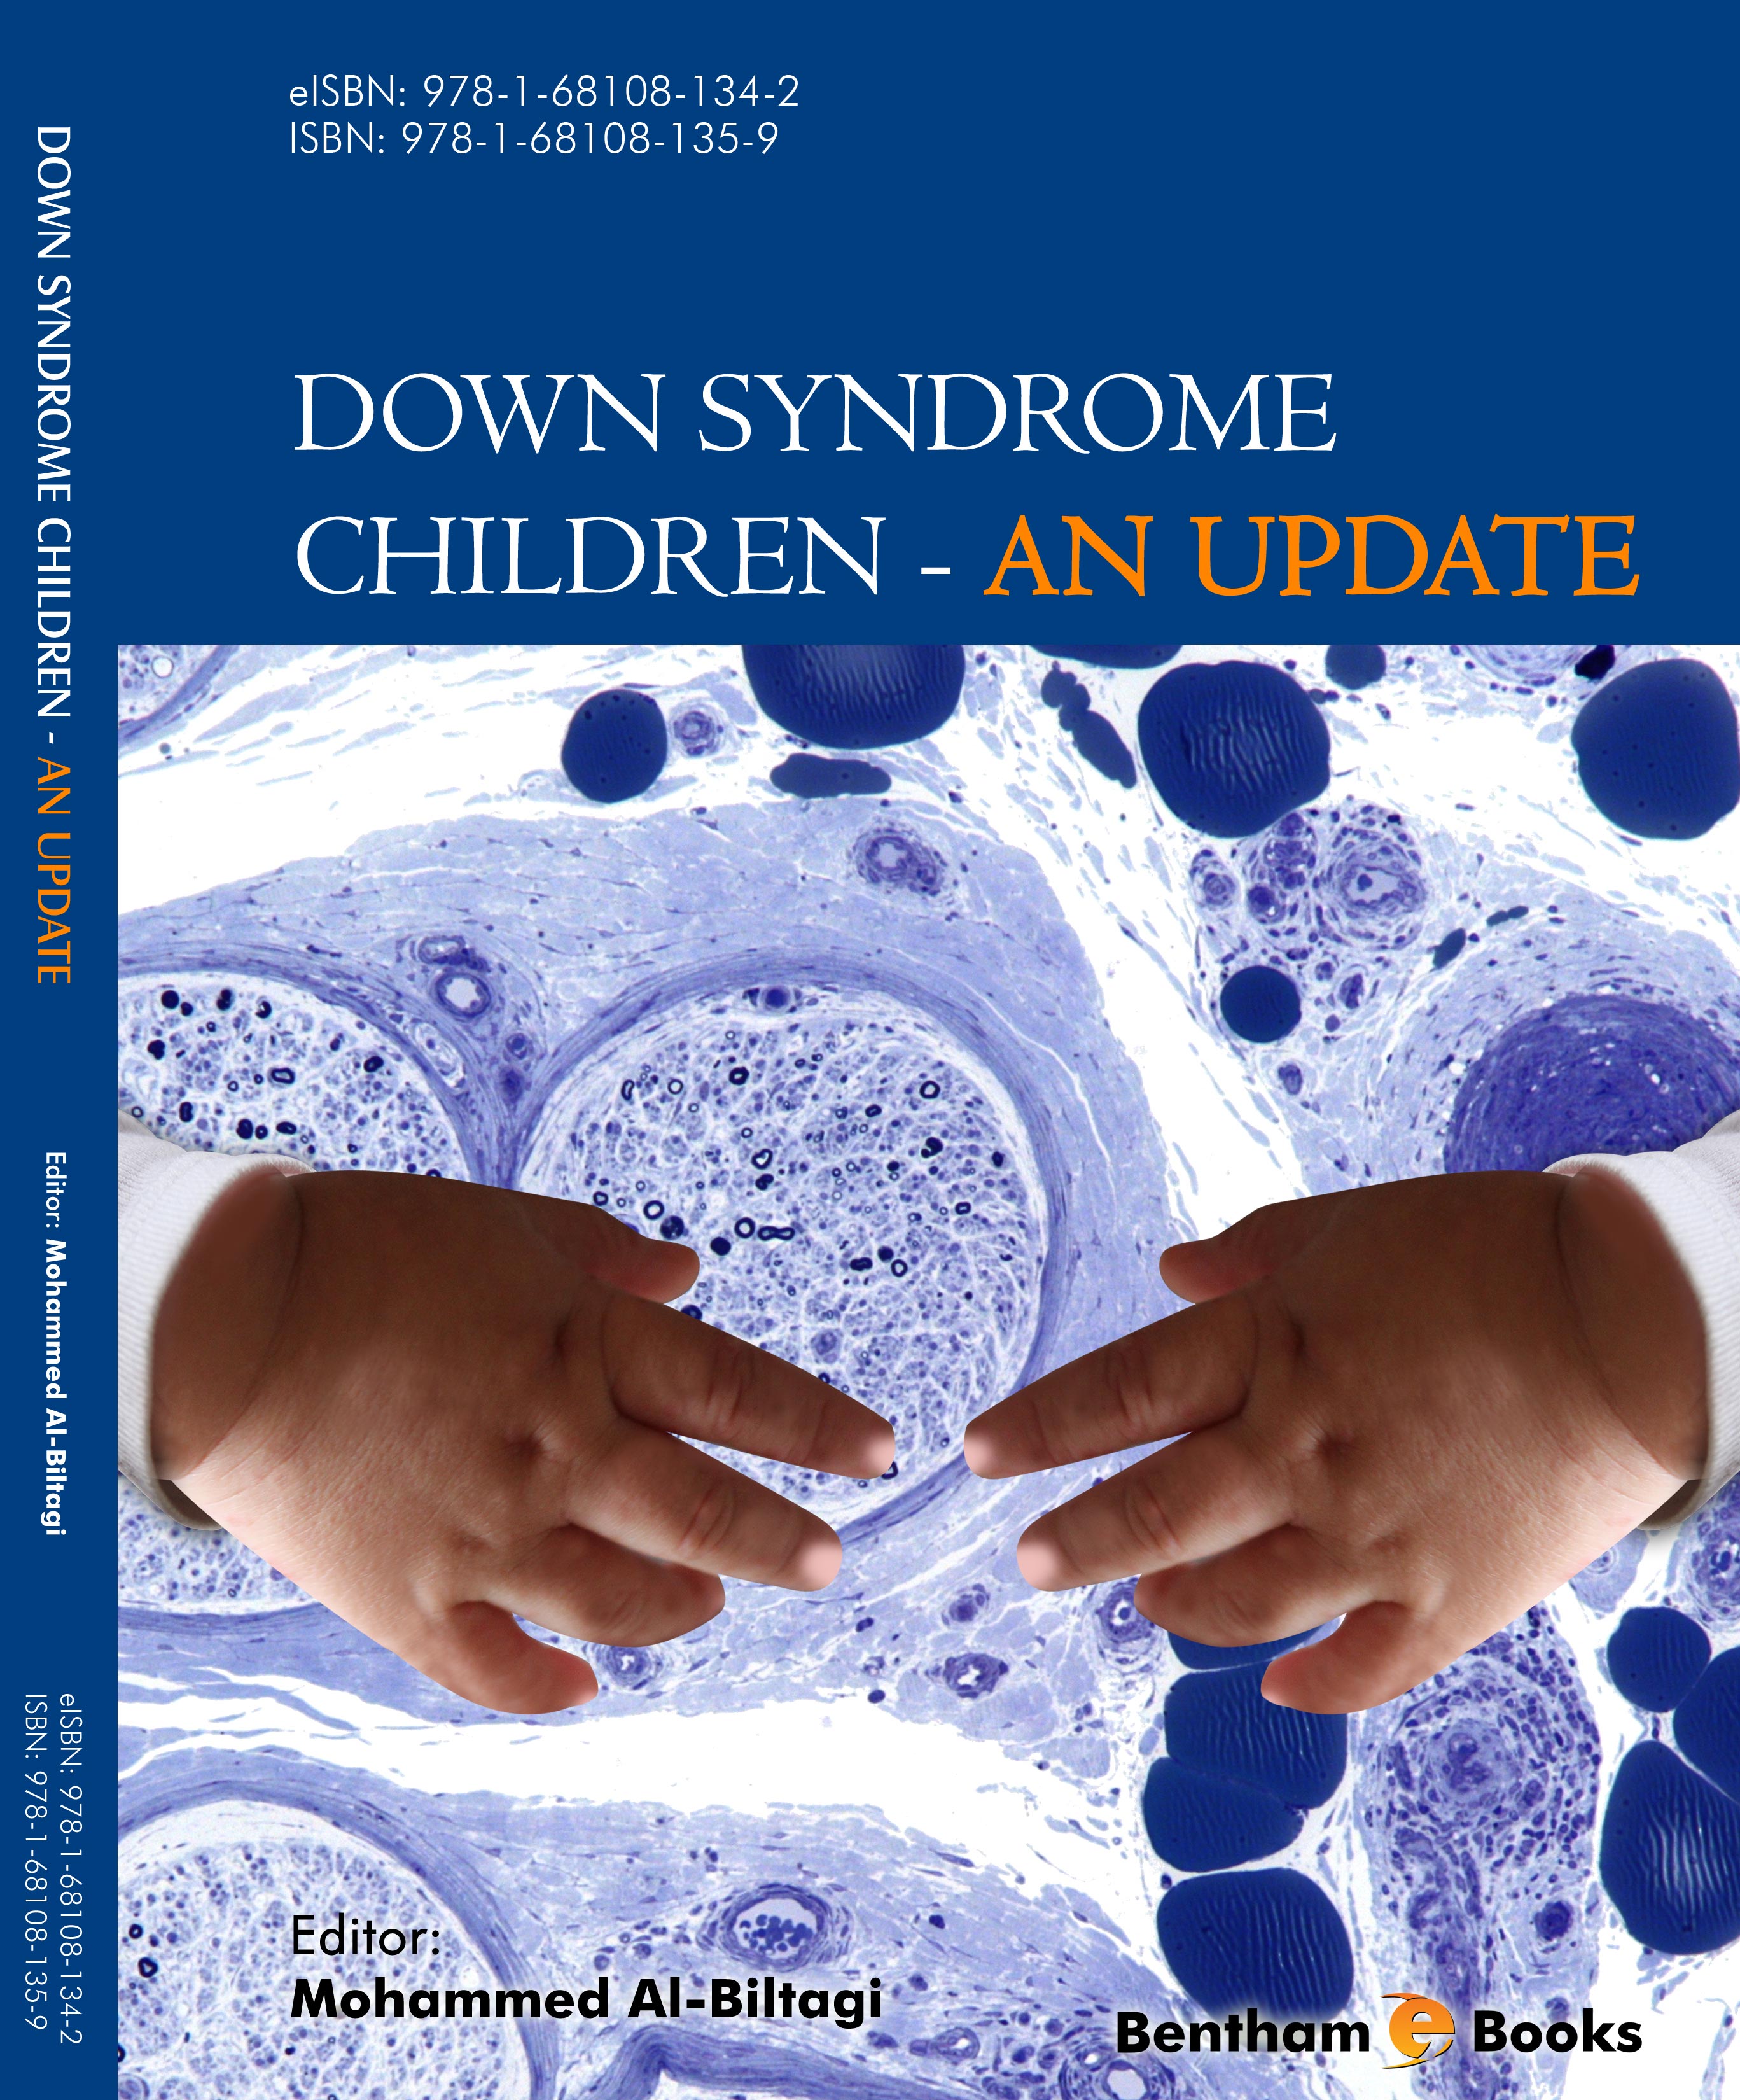 Down Syndrome Children - An Update